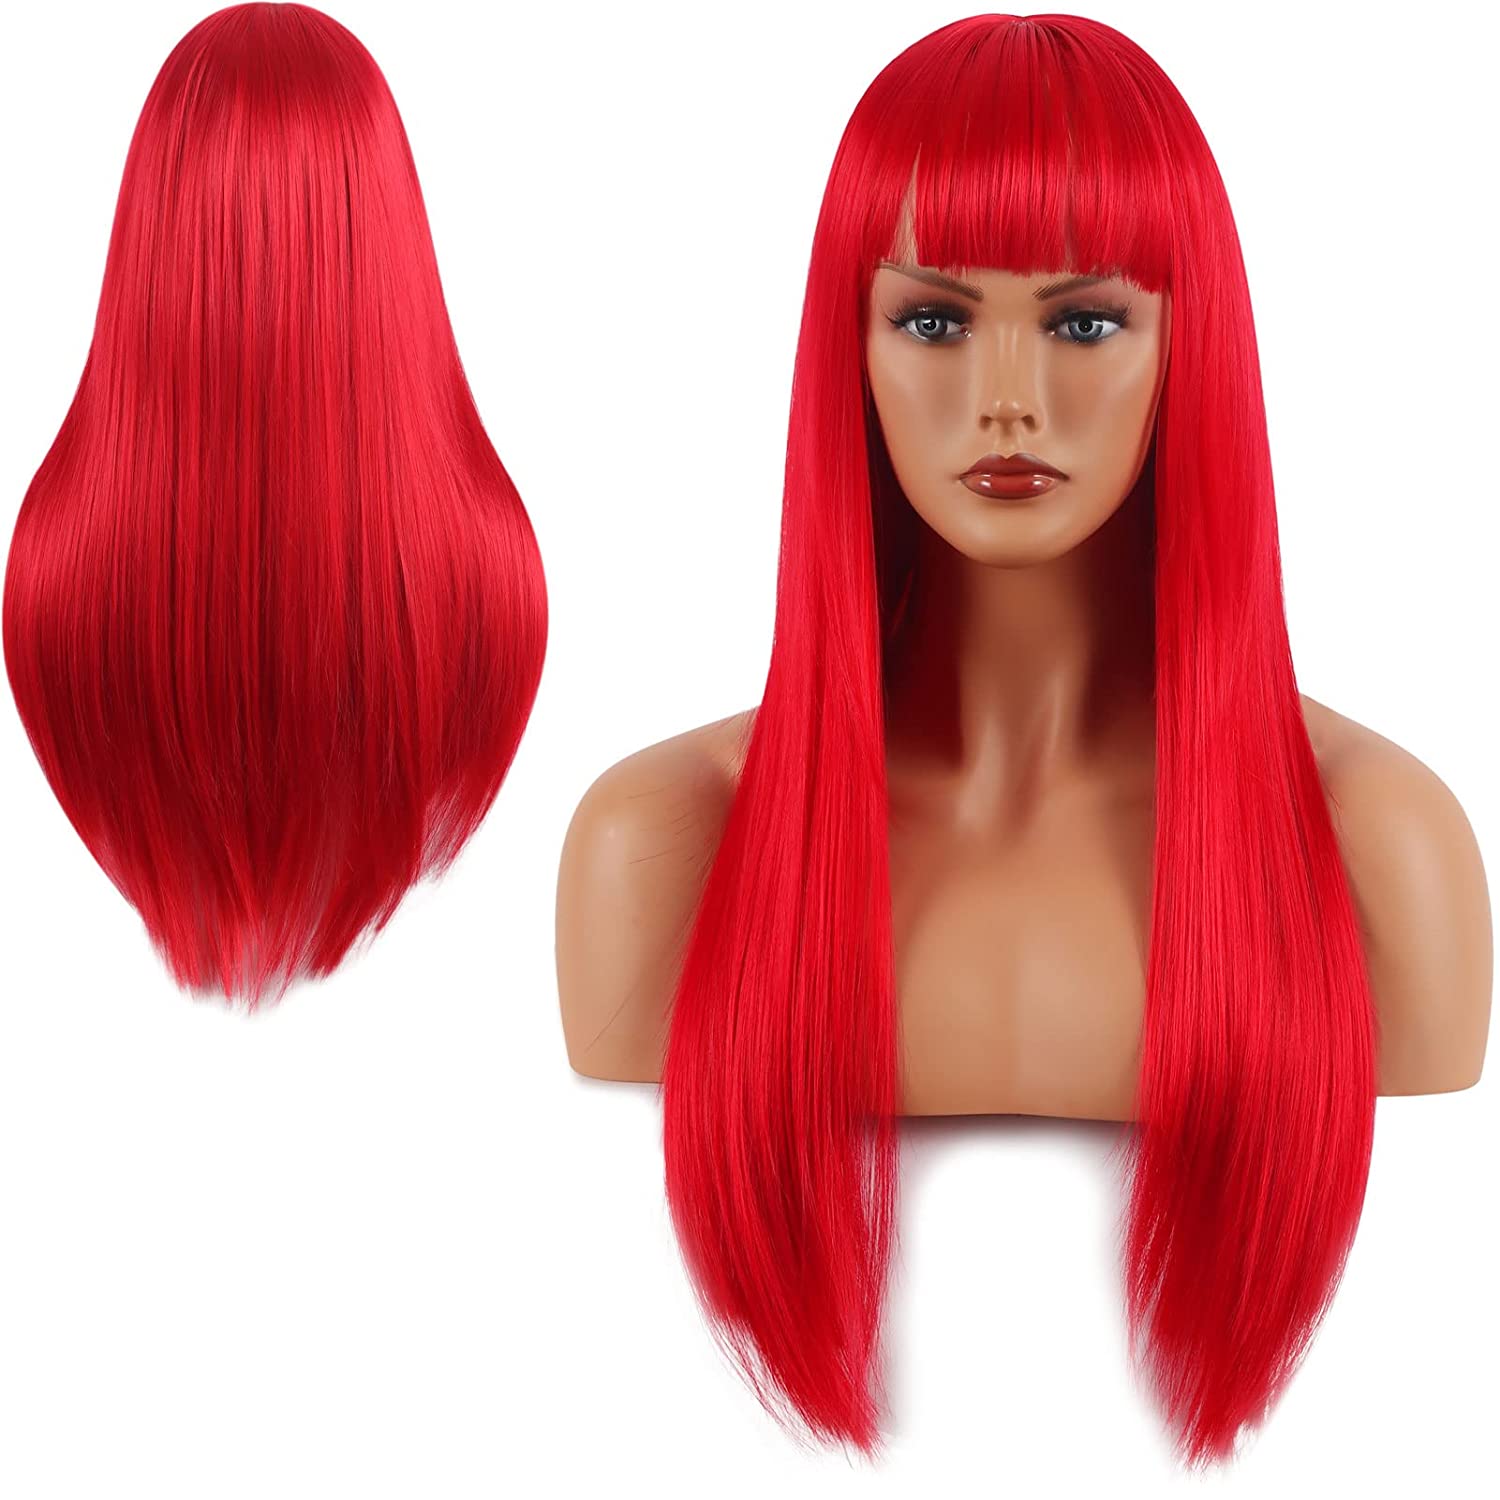  Long Straight Wigs with Bangs, Red Wigs for Women Fashion - Synthetic Wig, Cosplay Wig, Long Red Hair Wig with Bangs,Long Straight Wig with Bangs,cosplay wig, synthetic wig, bang wig, Long Hair, Straight